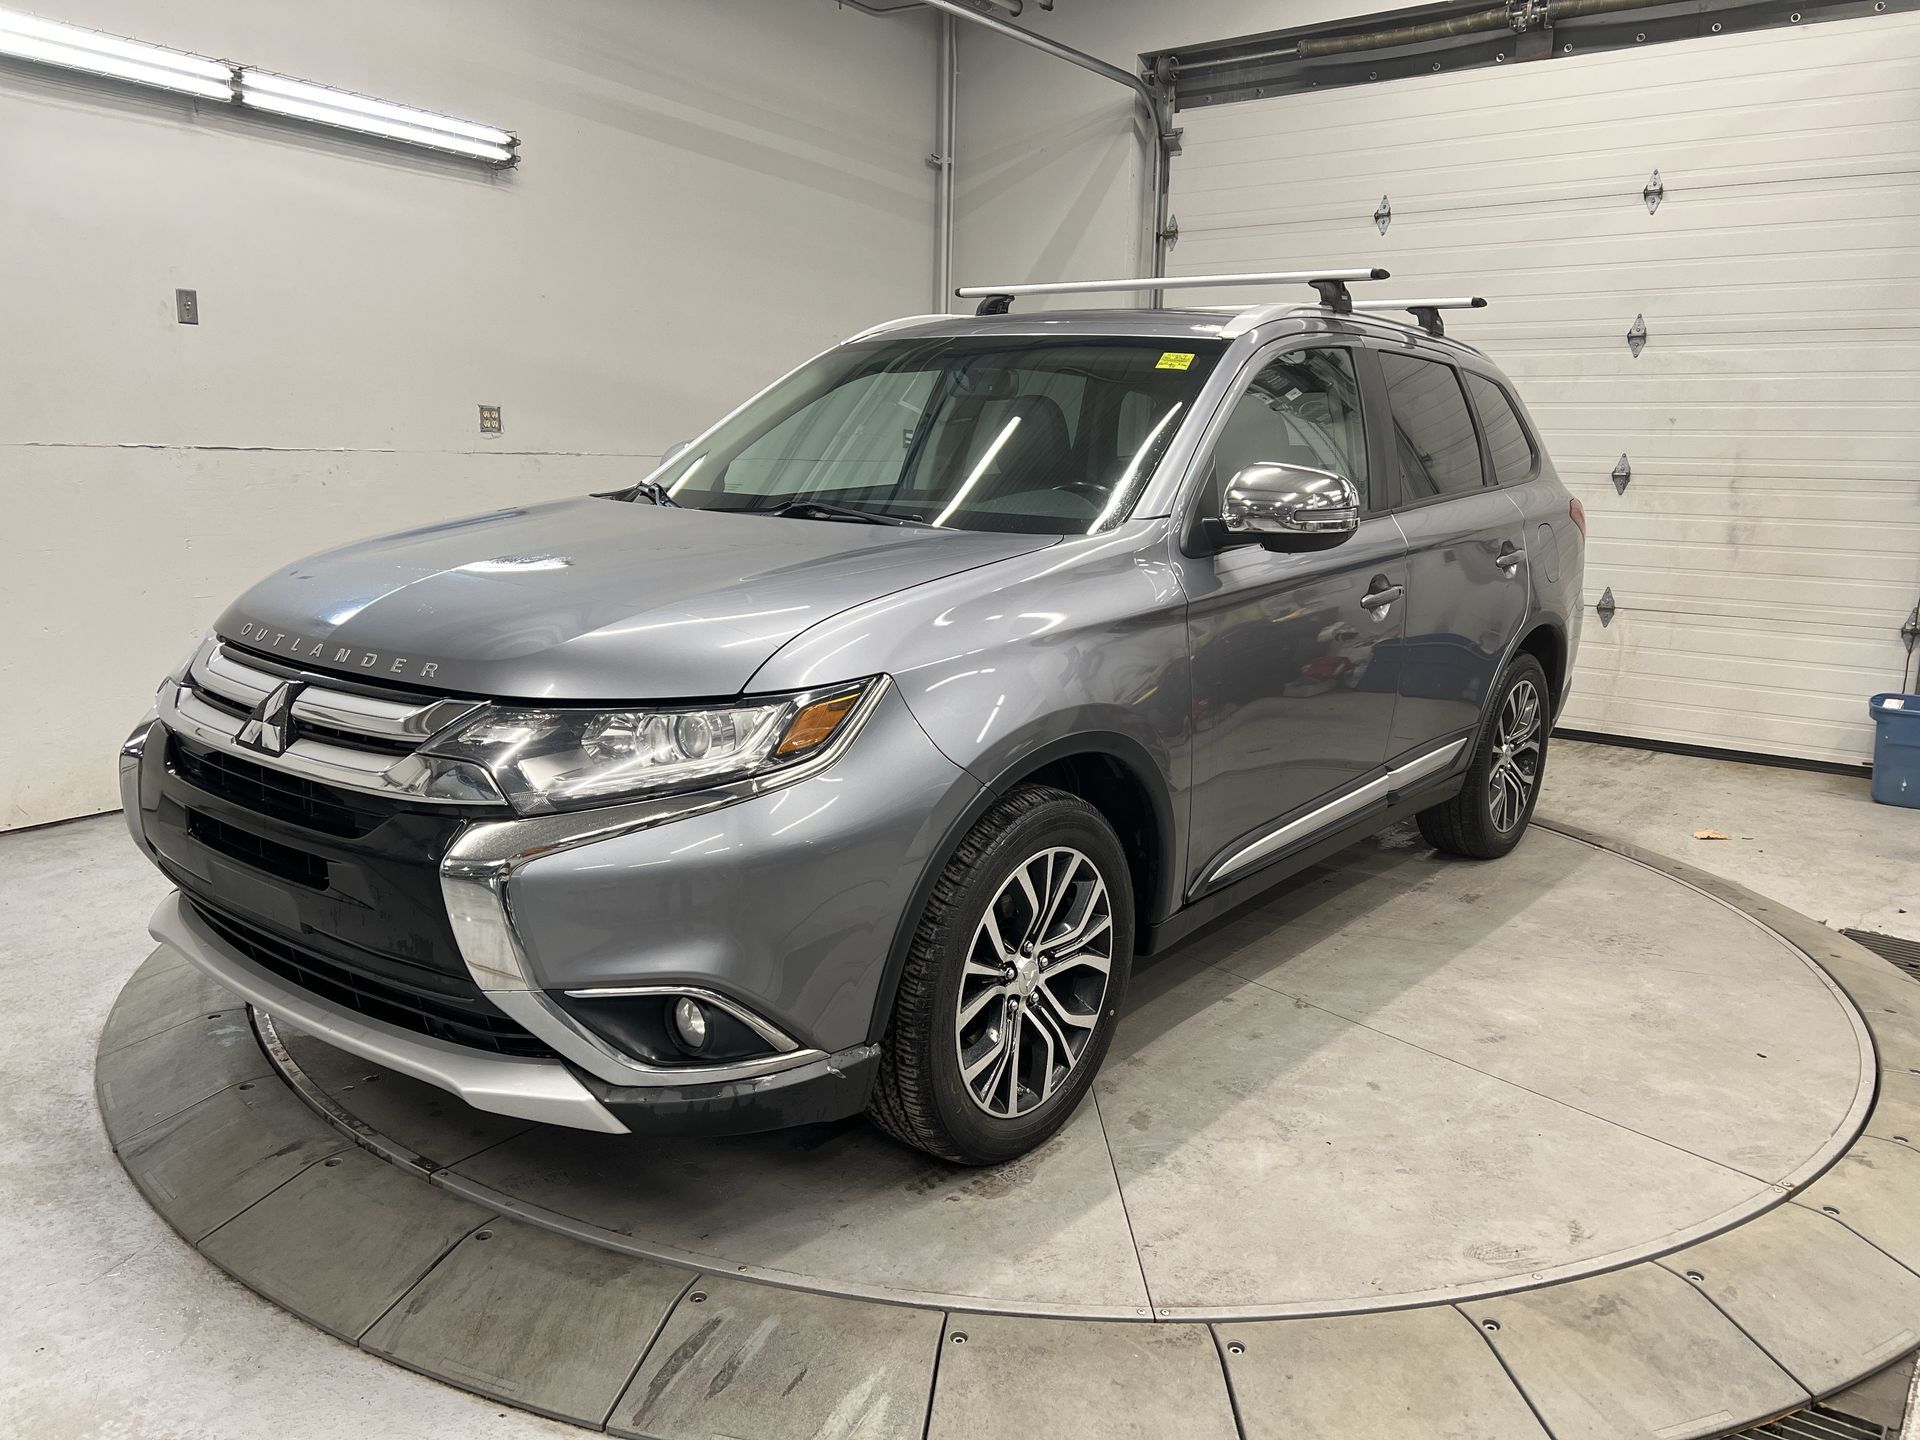 2016 Mitsubishi Outlander ES PREMIUM AWC | SUNROOF | LEATHER | LOW KMS!